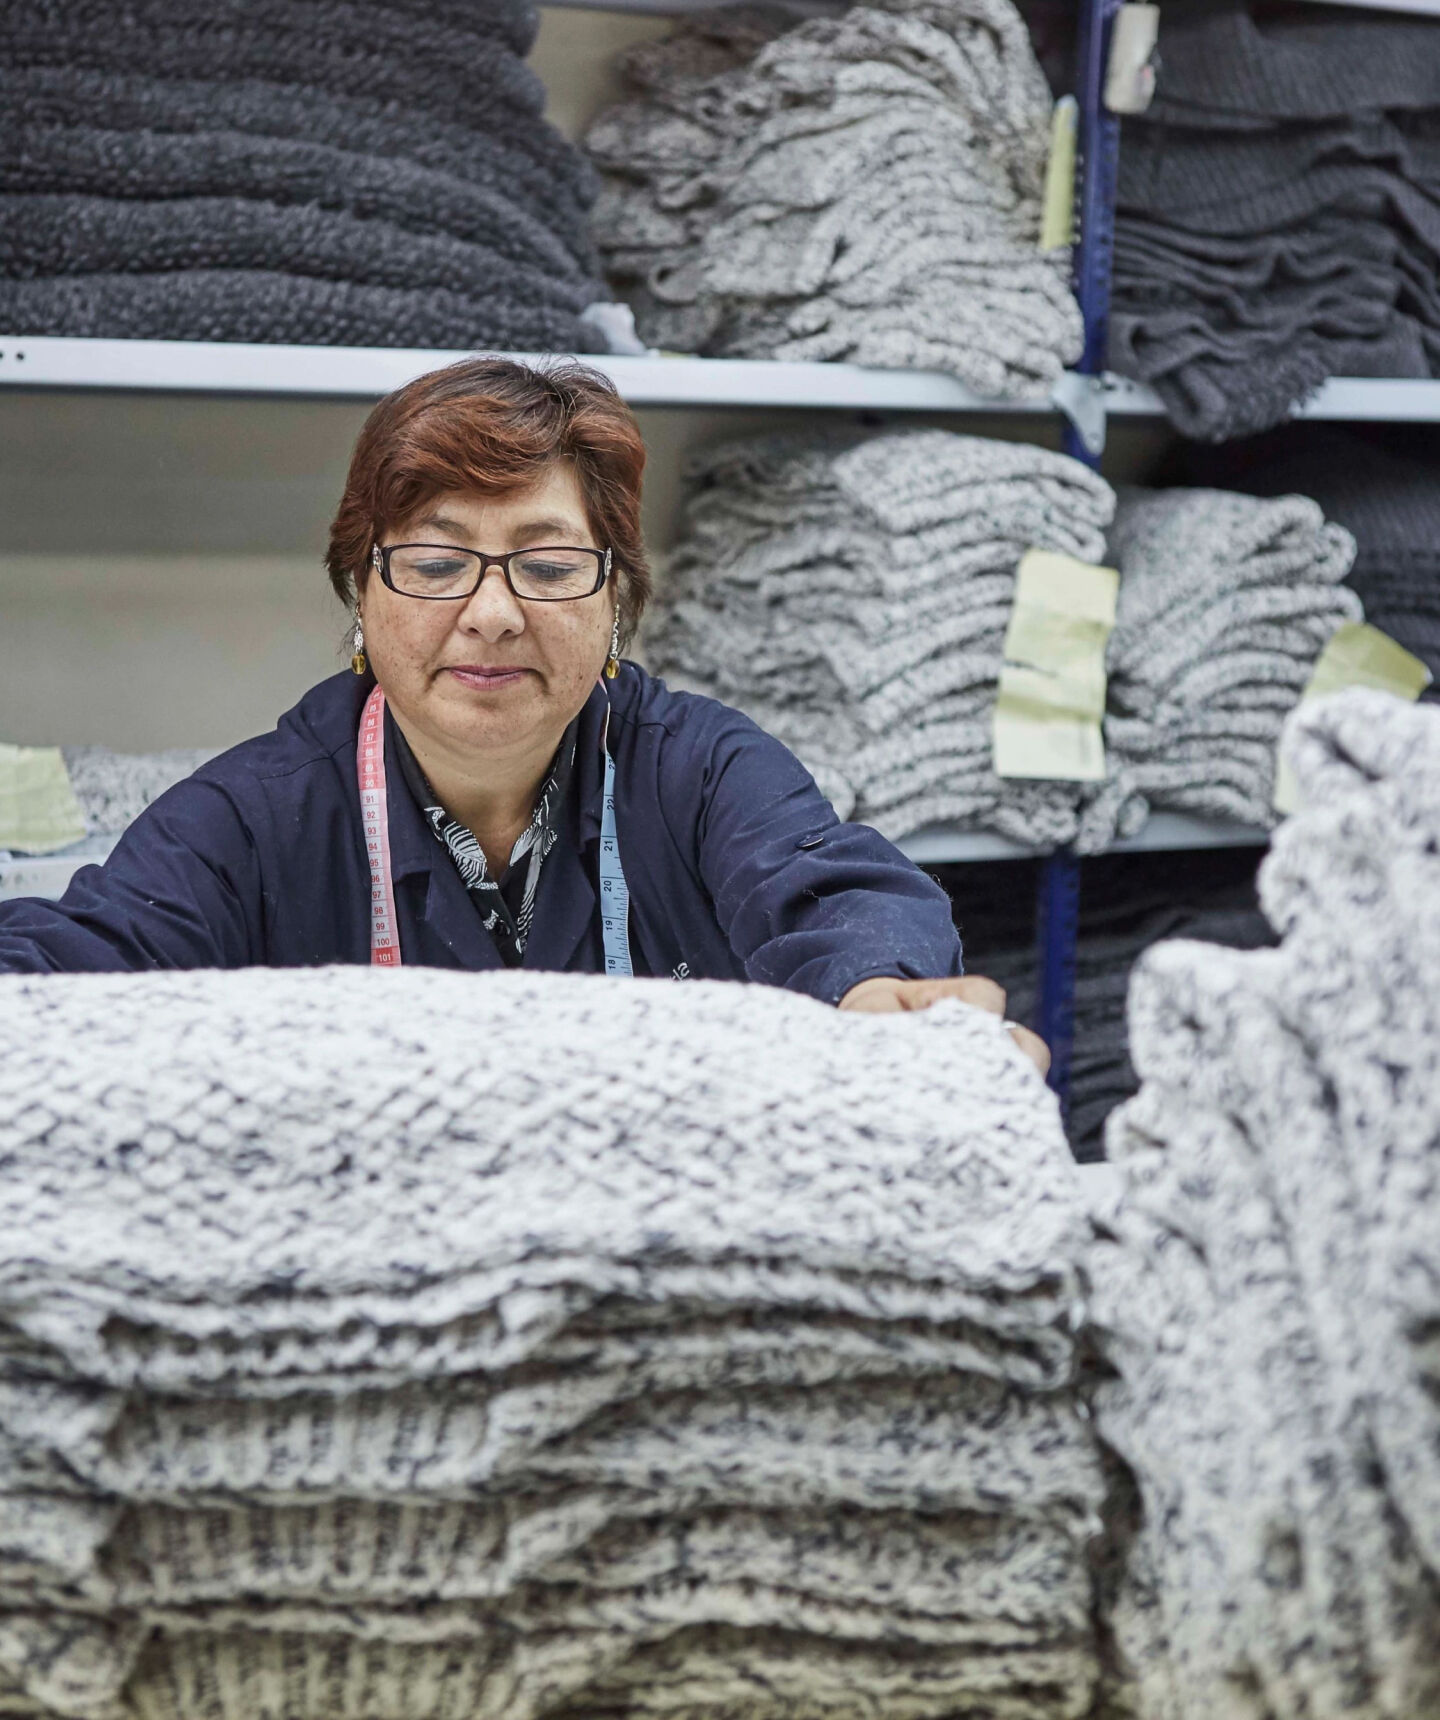 Woman folding sweaters at a knit factory.